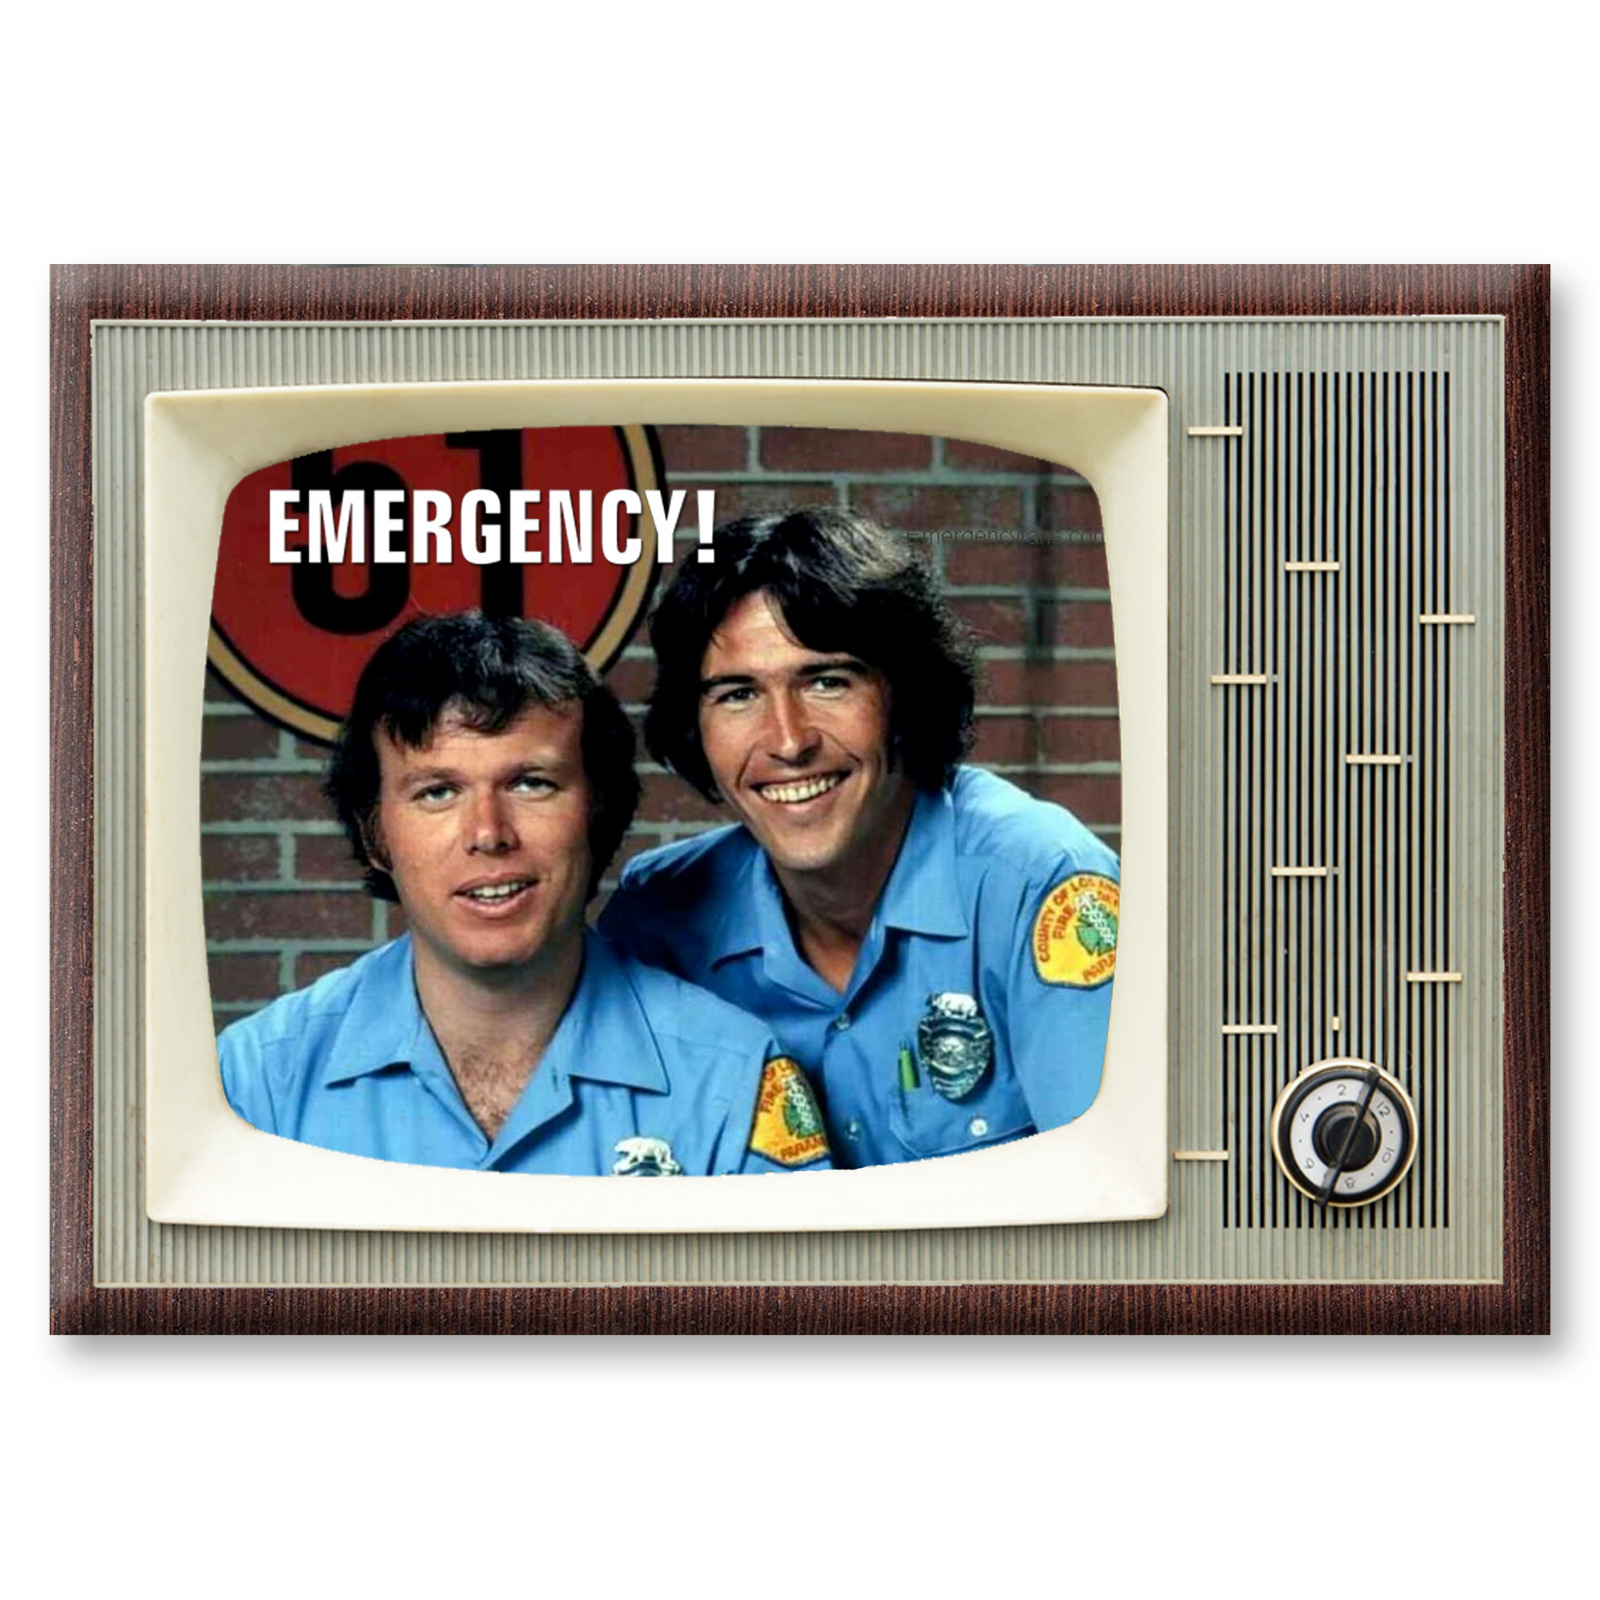 Emergency TV Show Retro TV 3.5 inches x 2.5 inches Steel Fridge Magnet